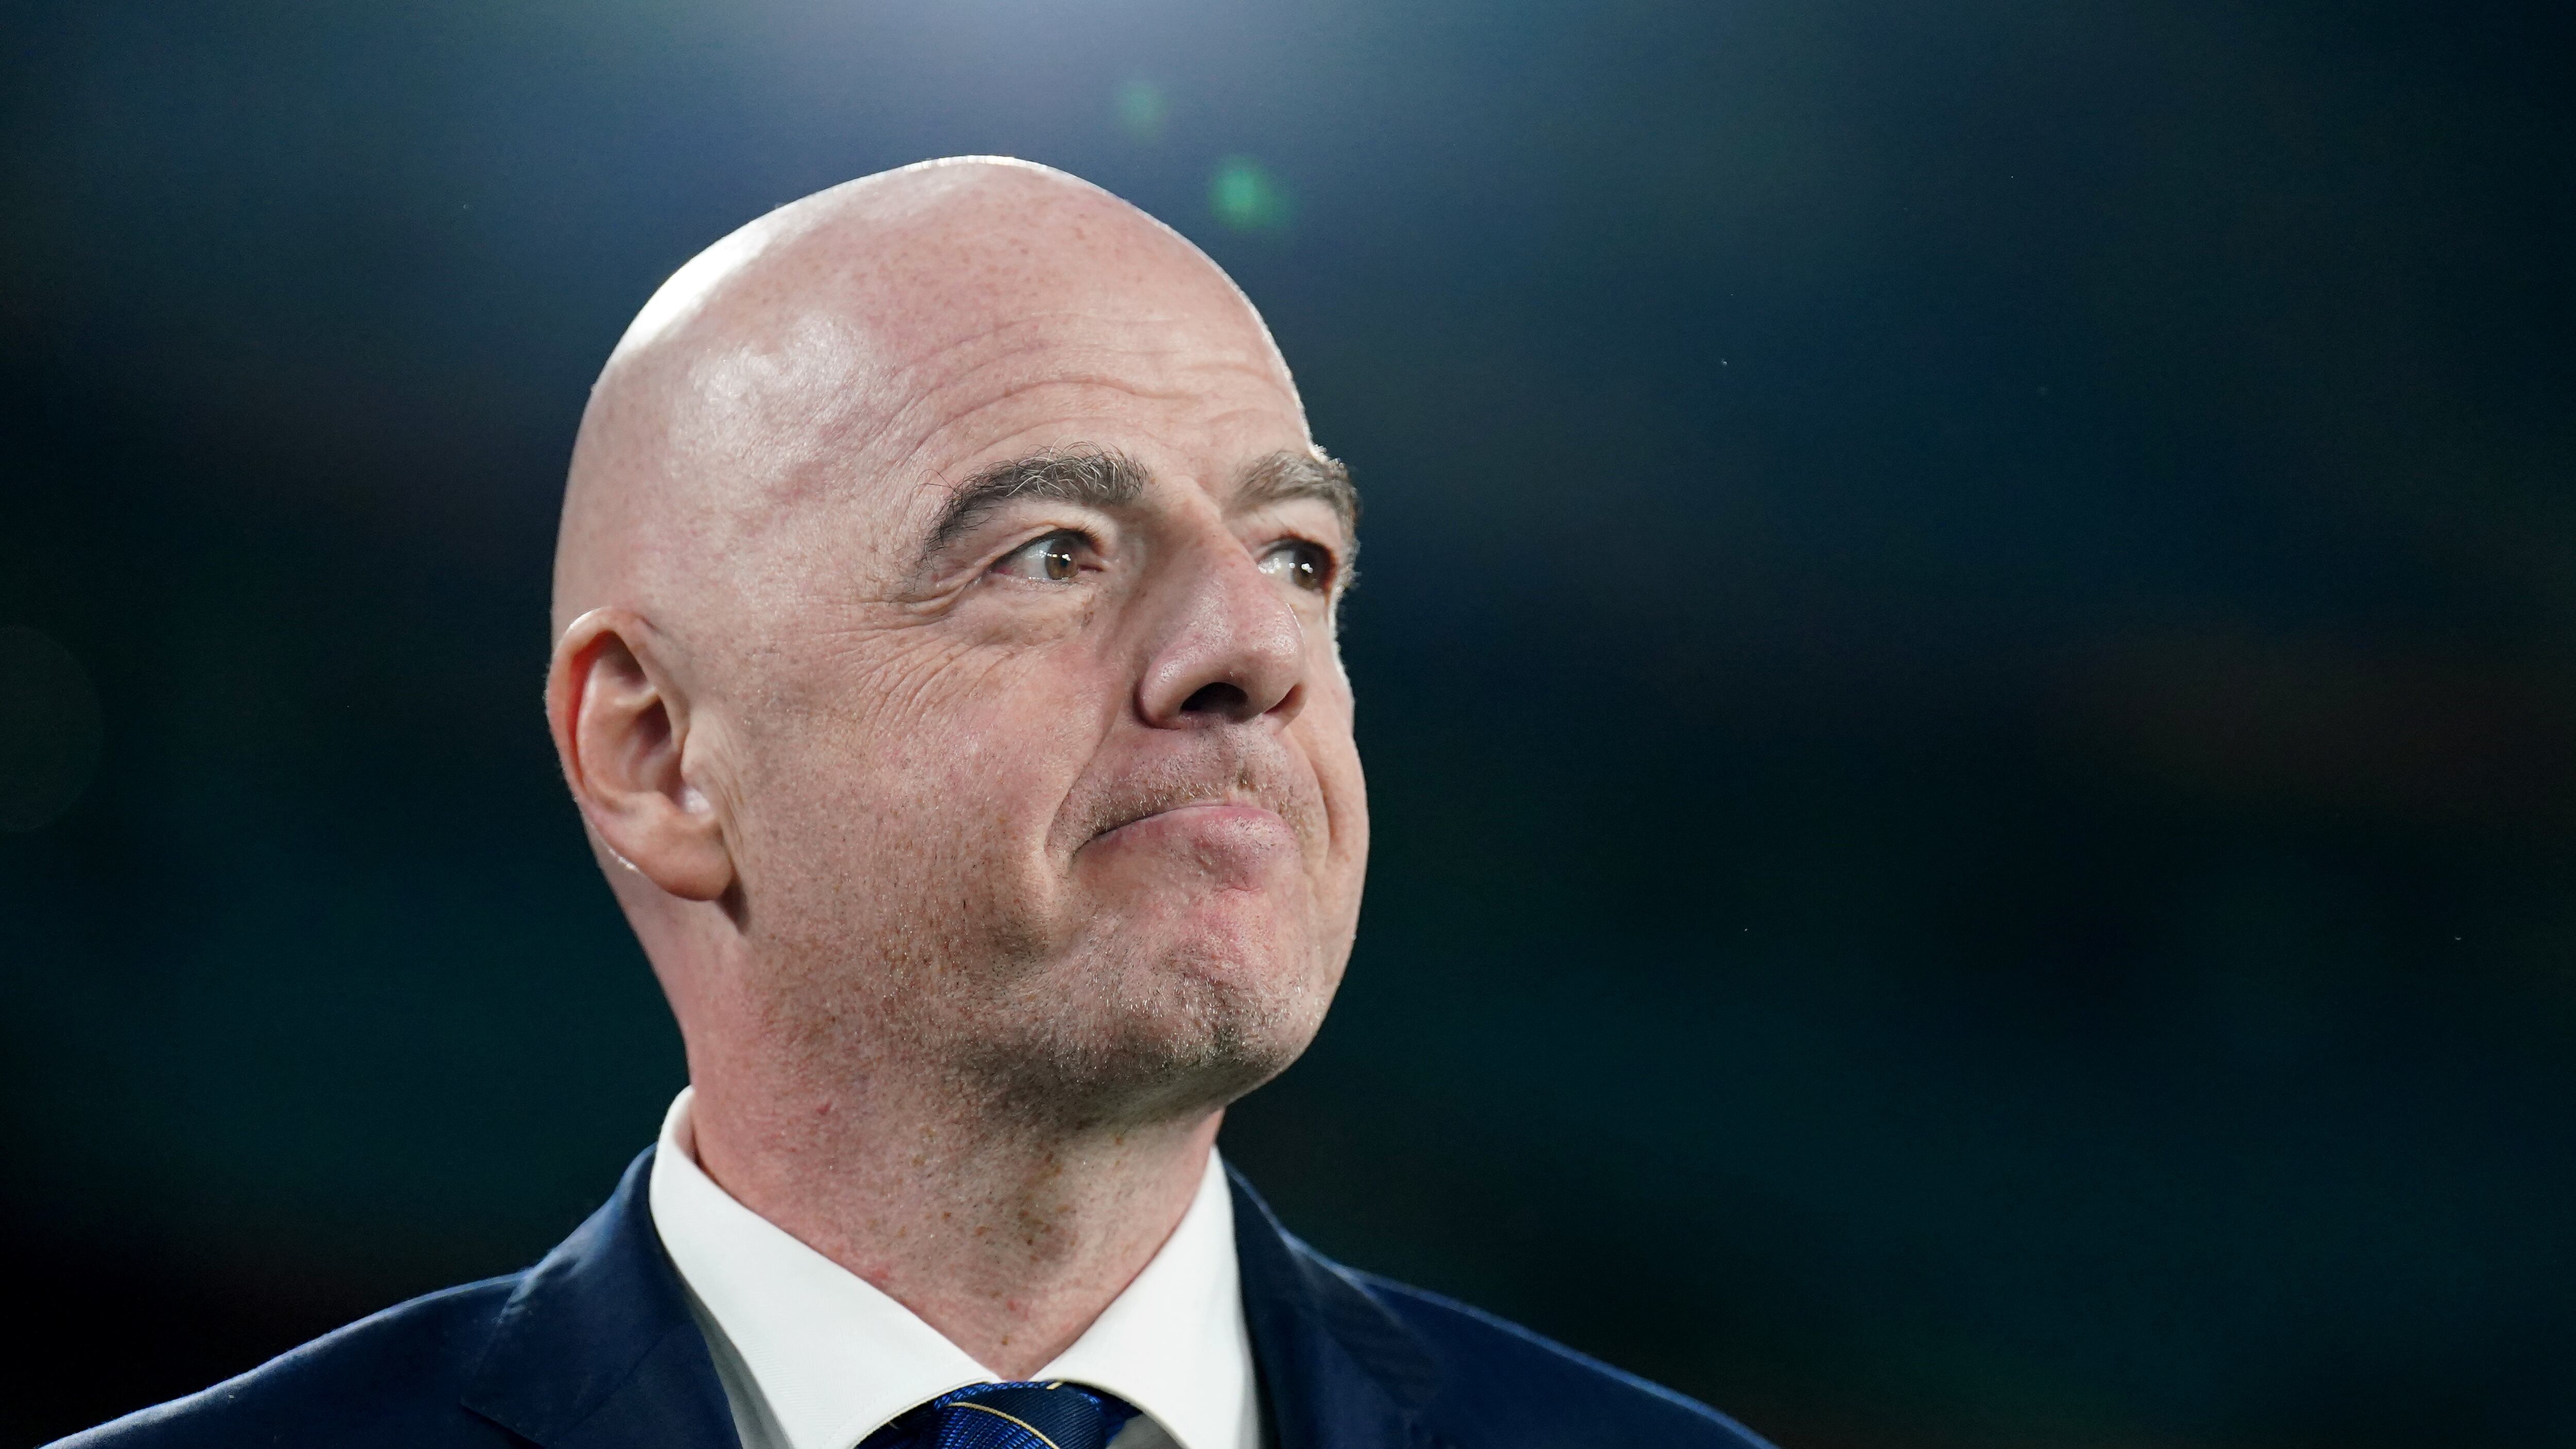 FIFA and its president Gianni Infantino have been threatened with legal action if the Club World Cup is not rescheduled